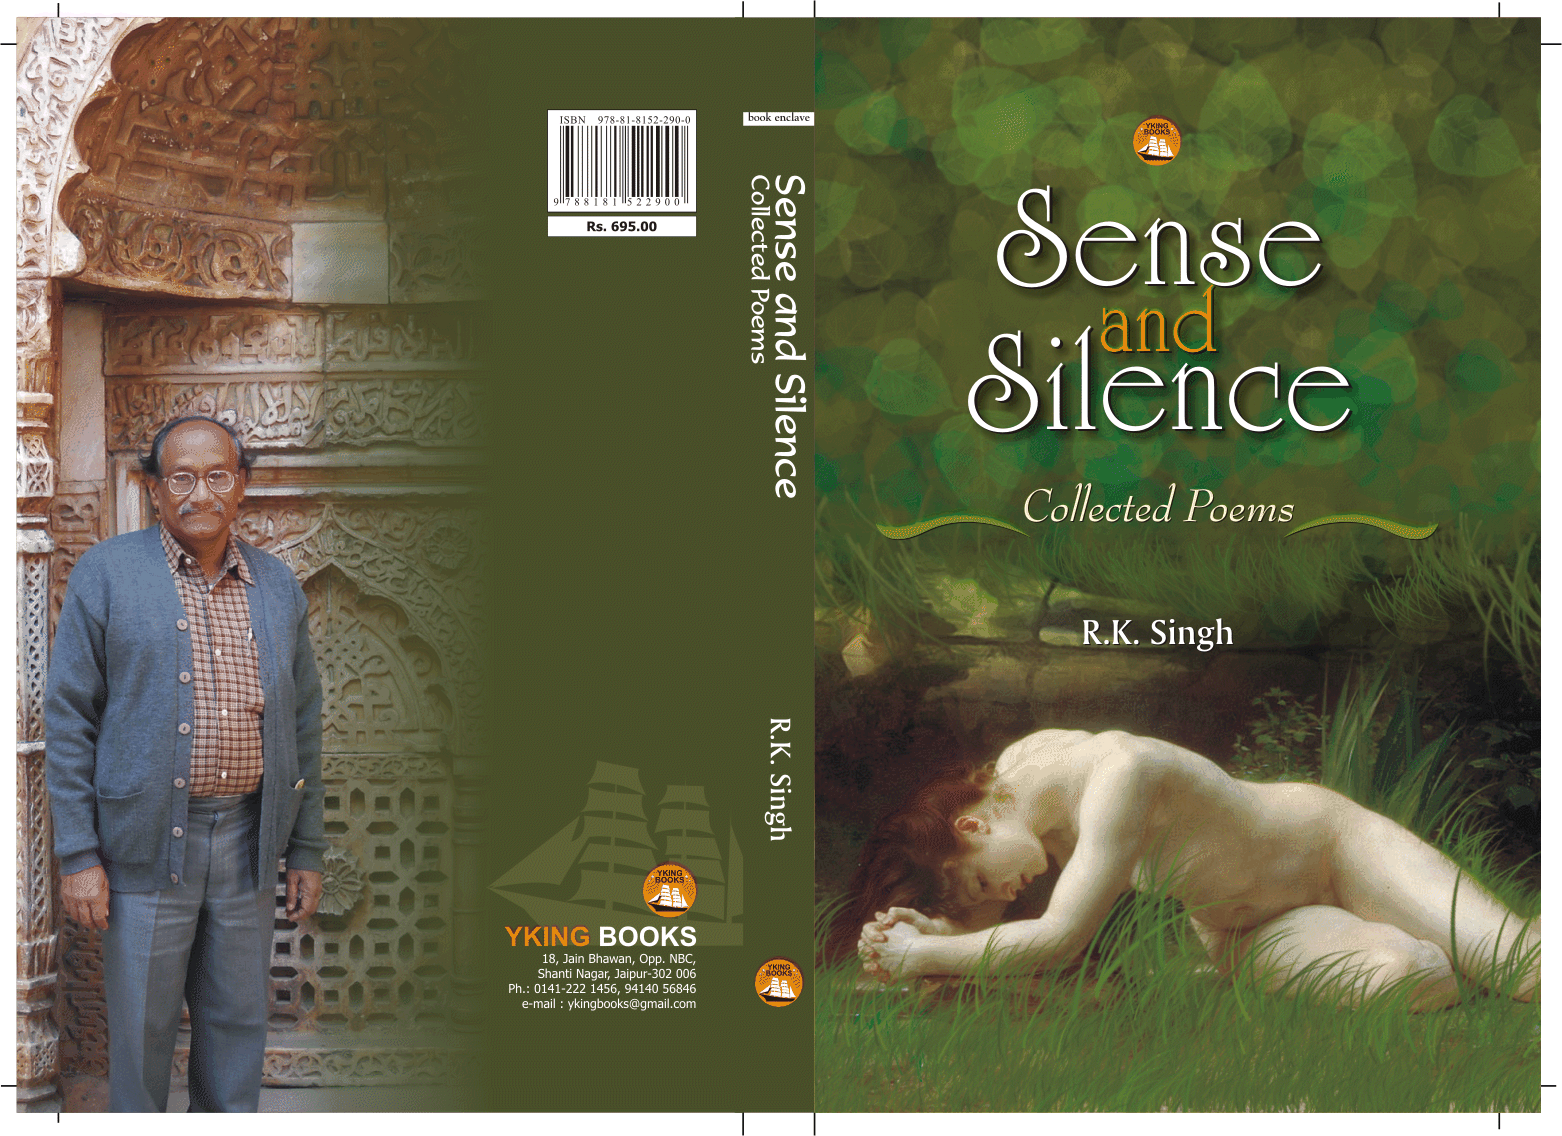 collected poems of r k singh sense and silence collected poems of small